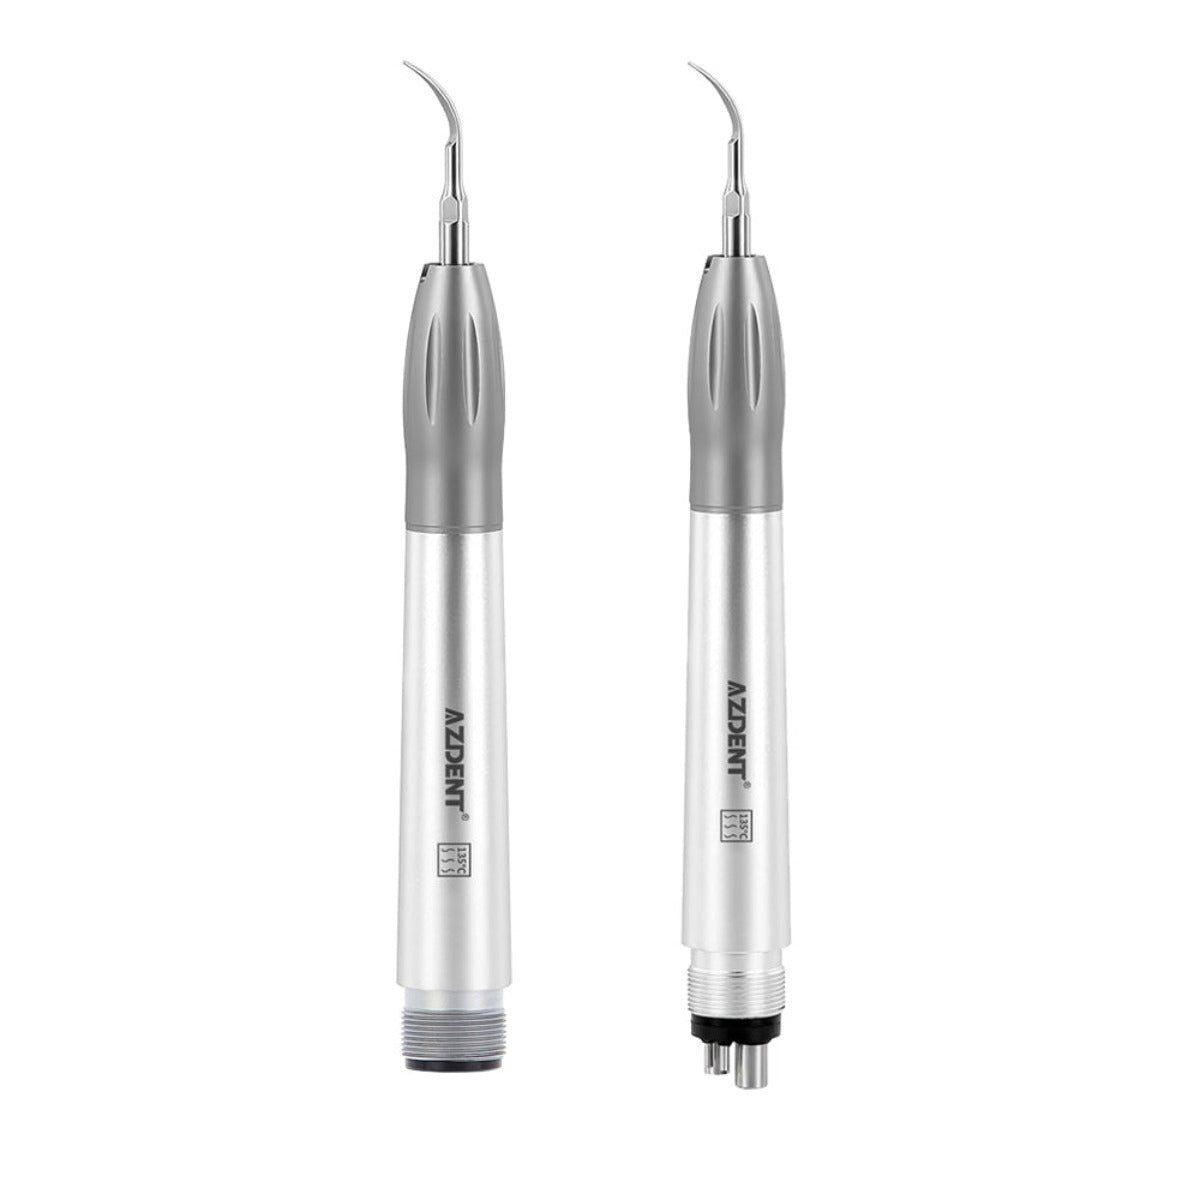 2/4 Holes Dental Air Scaler Handpiece Super Sonic Scaling Handle with 3 Tips (G1,G2,G4) - pairaydental.com